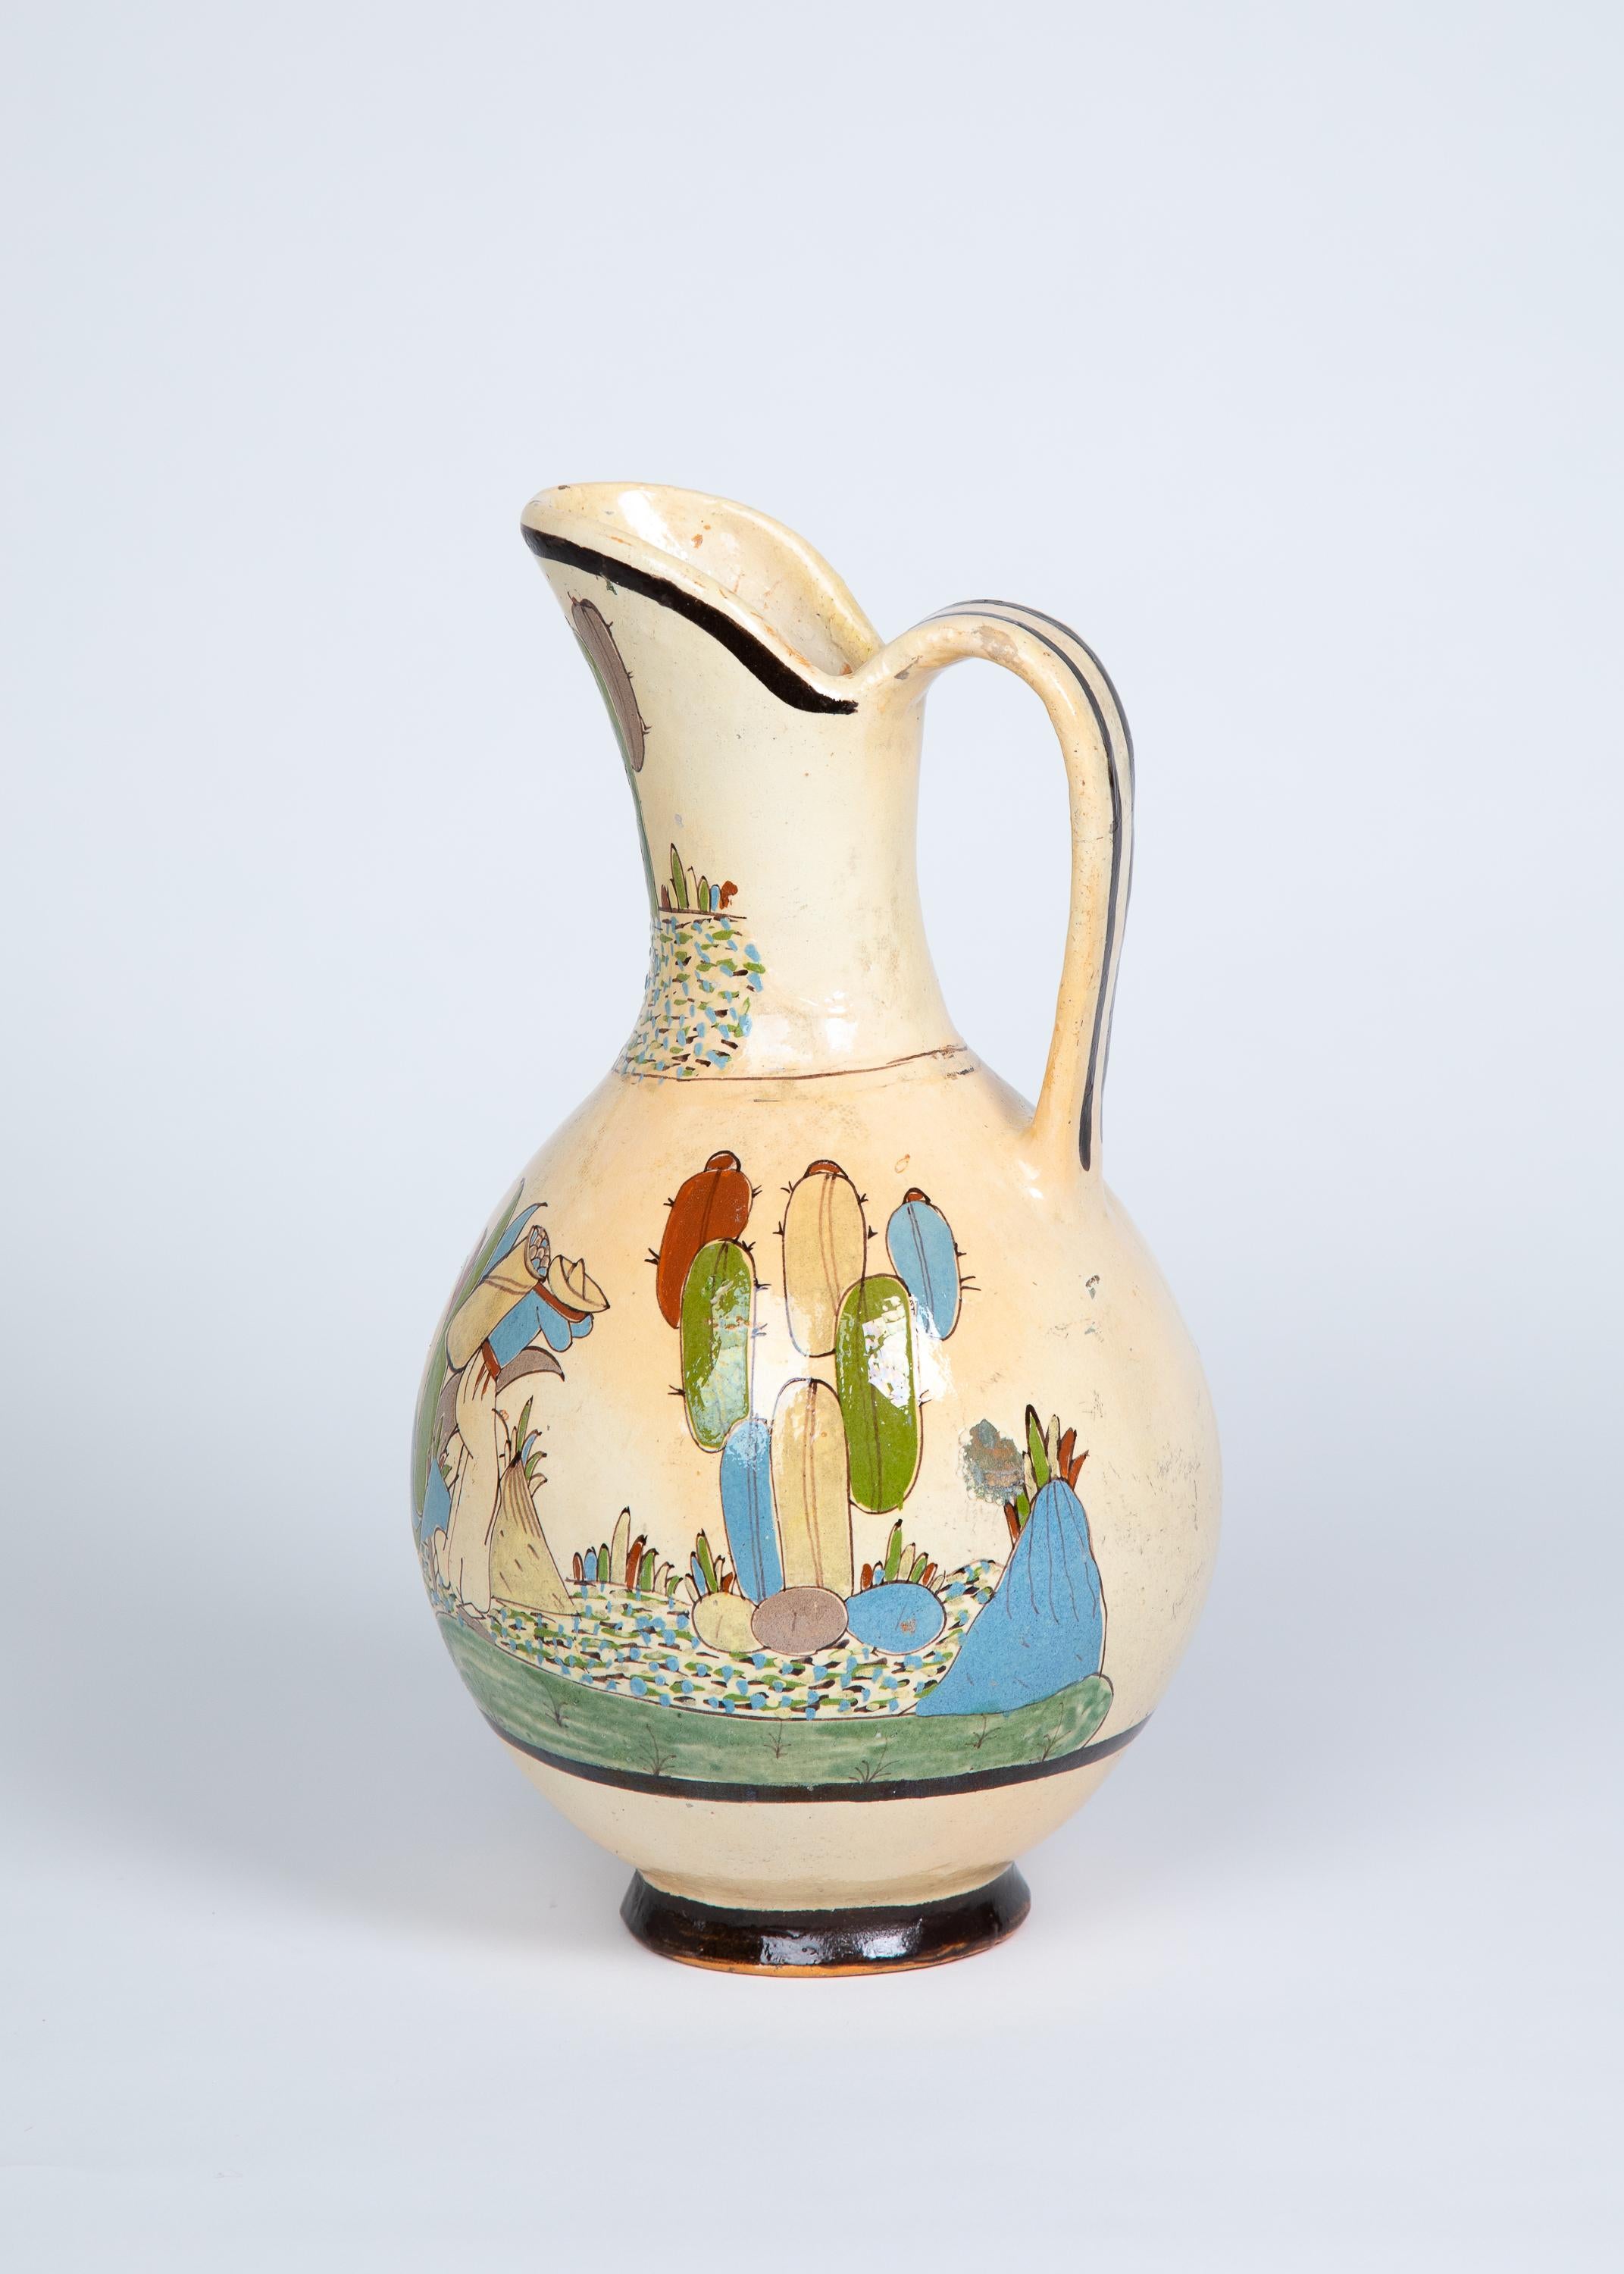 Hand-Crafted 1950s Tlaquepaque Mexican Hand Painted Ceramic Water Pitcher